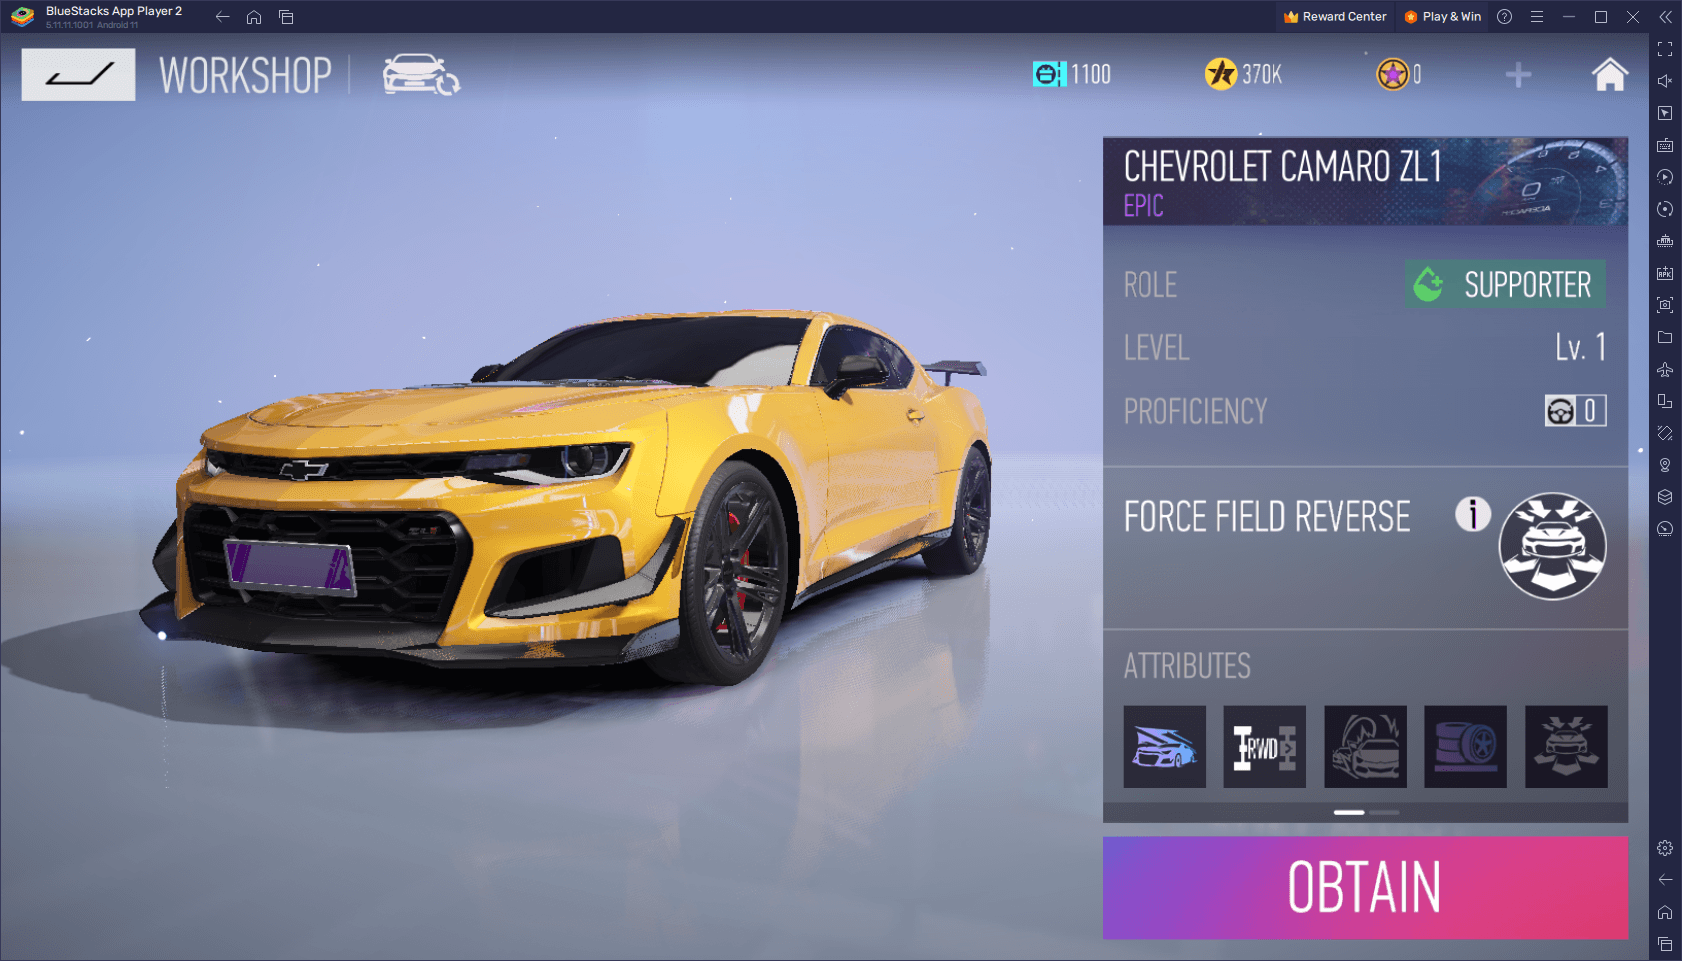 Ace Racer Vehicle Tier List - The Best Cars in the Game (Updated March 2023)